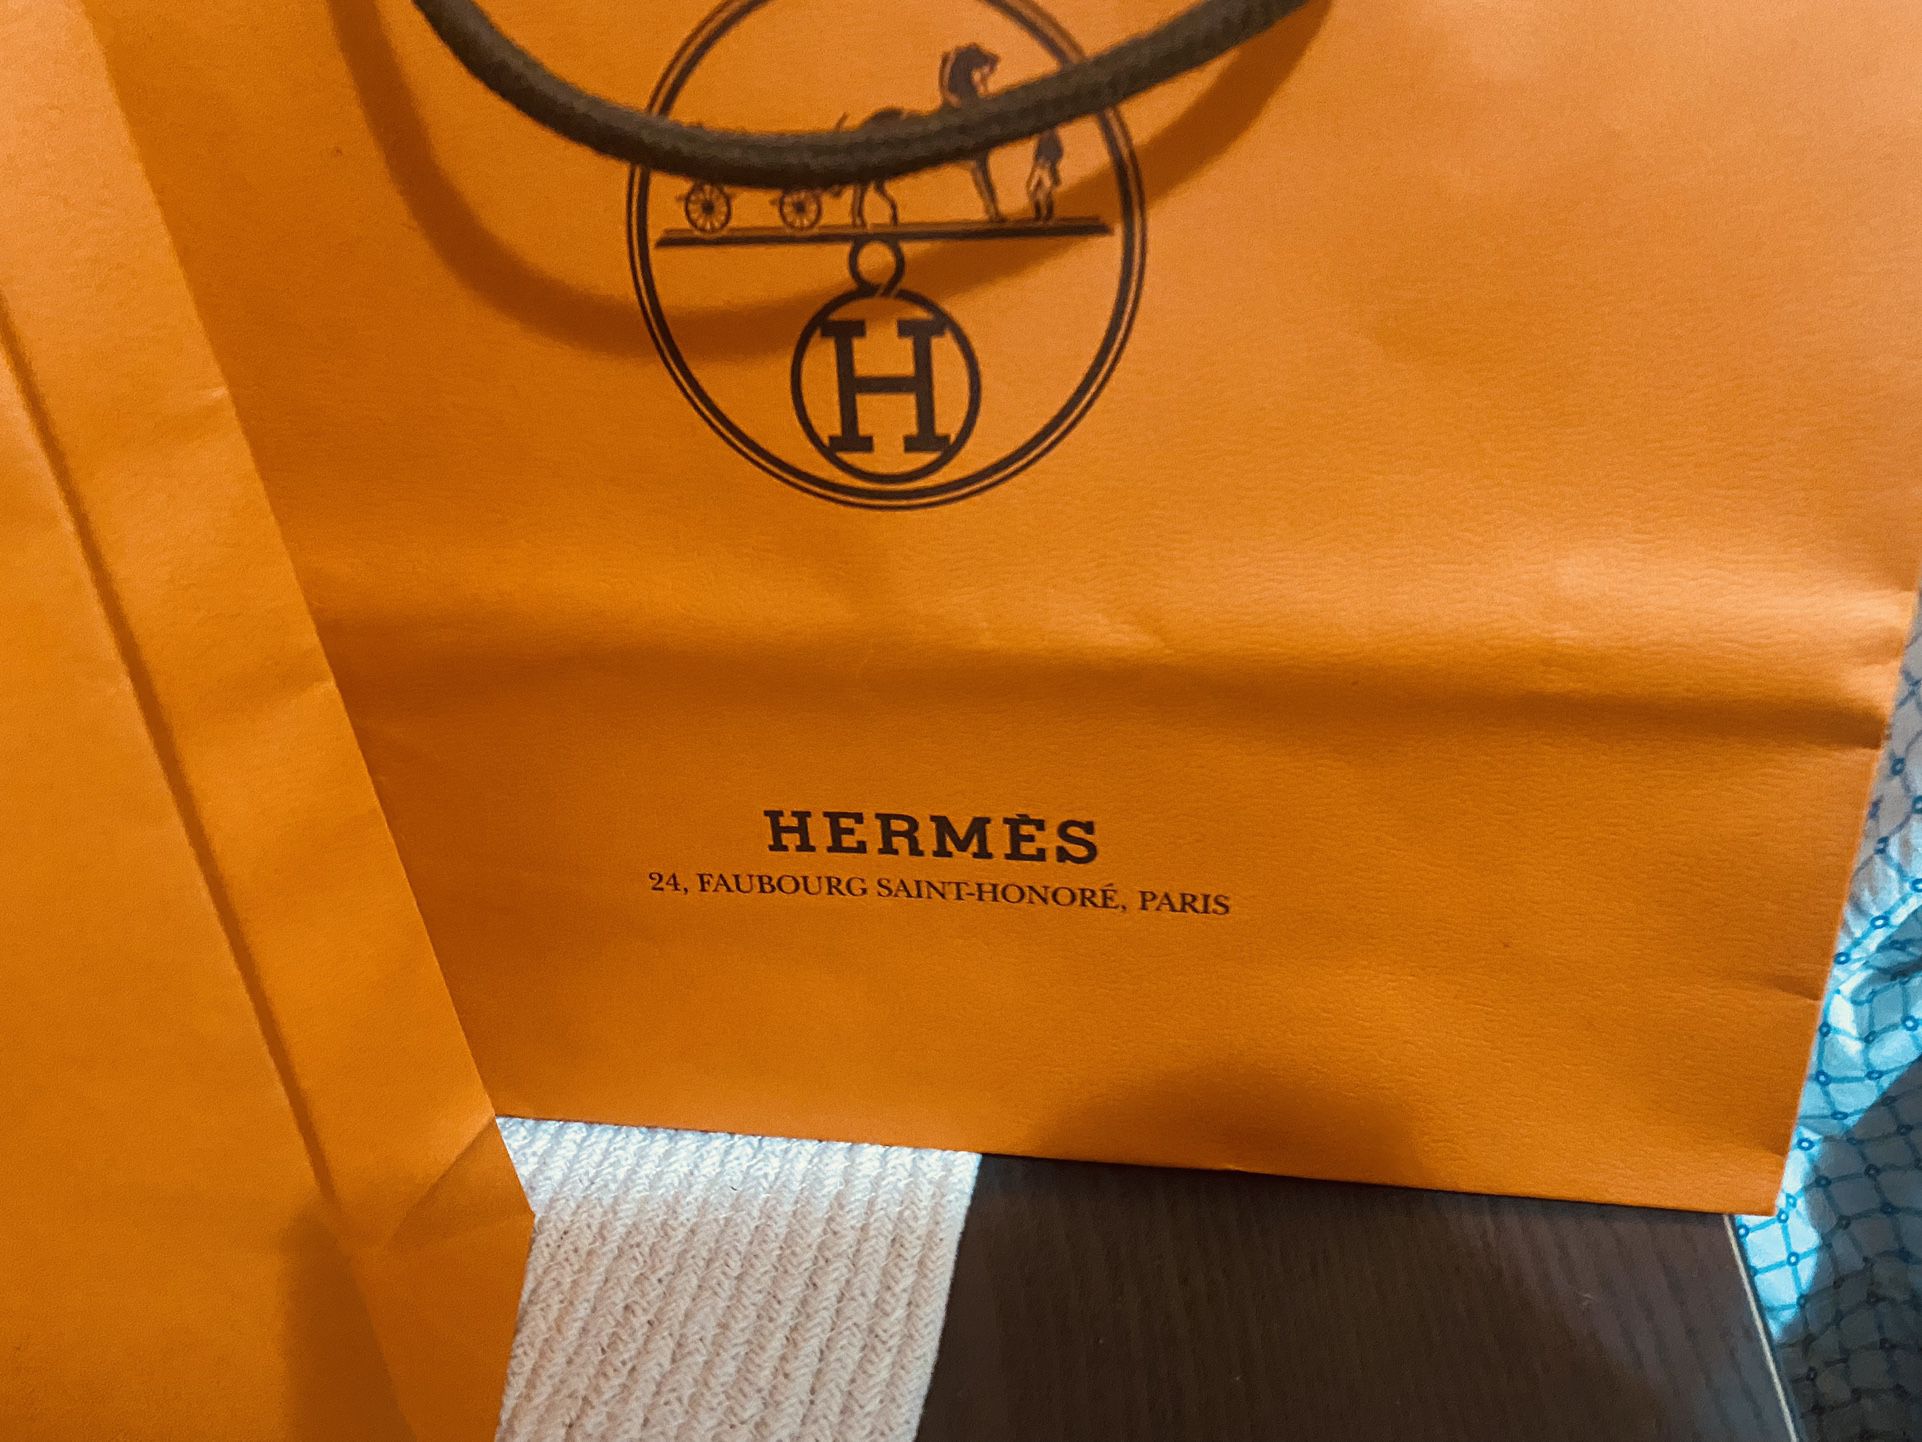 Hermes shopping bags + box bundle for Sale in The Bronx, NY - OfferUp